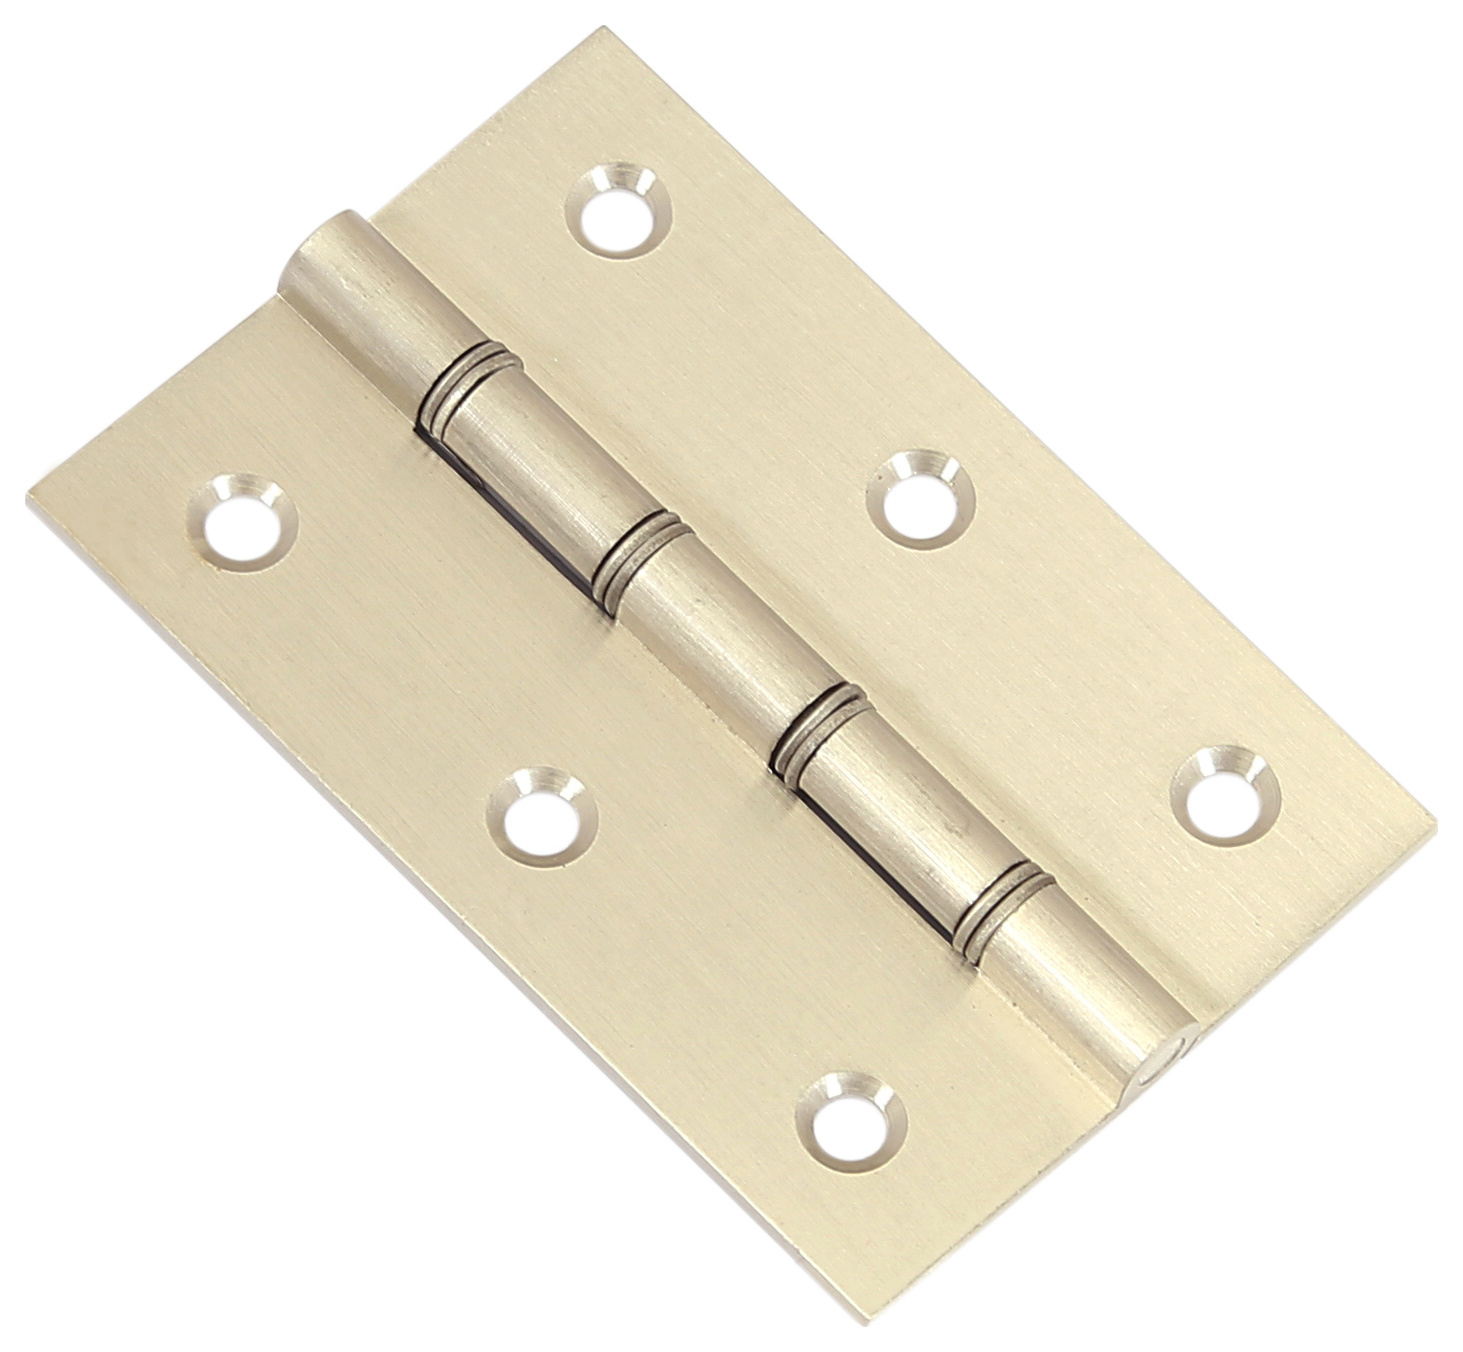 Image of Wickes Pack of 2 Double Steel Washered Butt Hinges, in Satin Nickel, Solid Brass, Size: 76mm